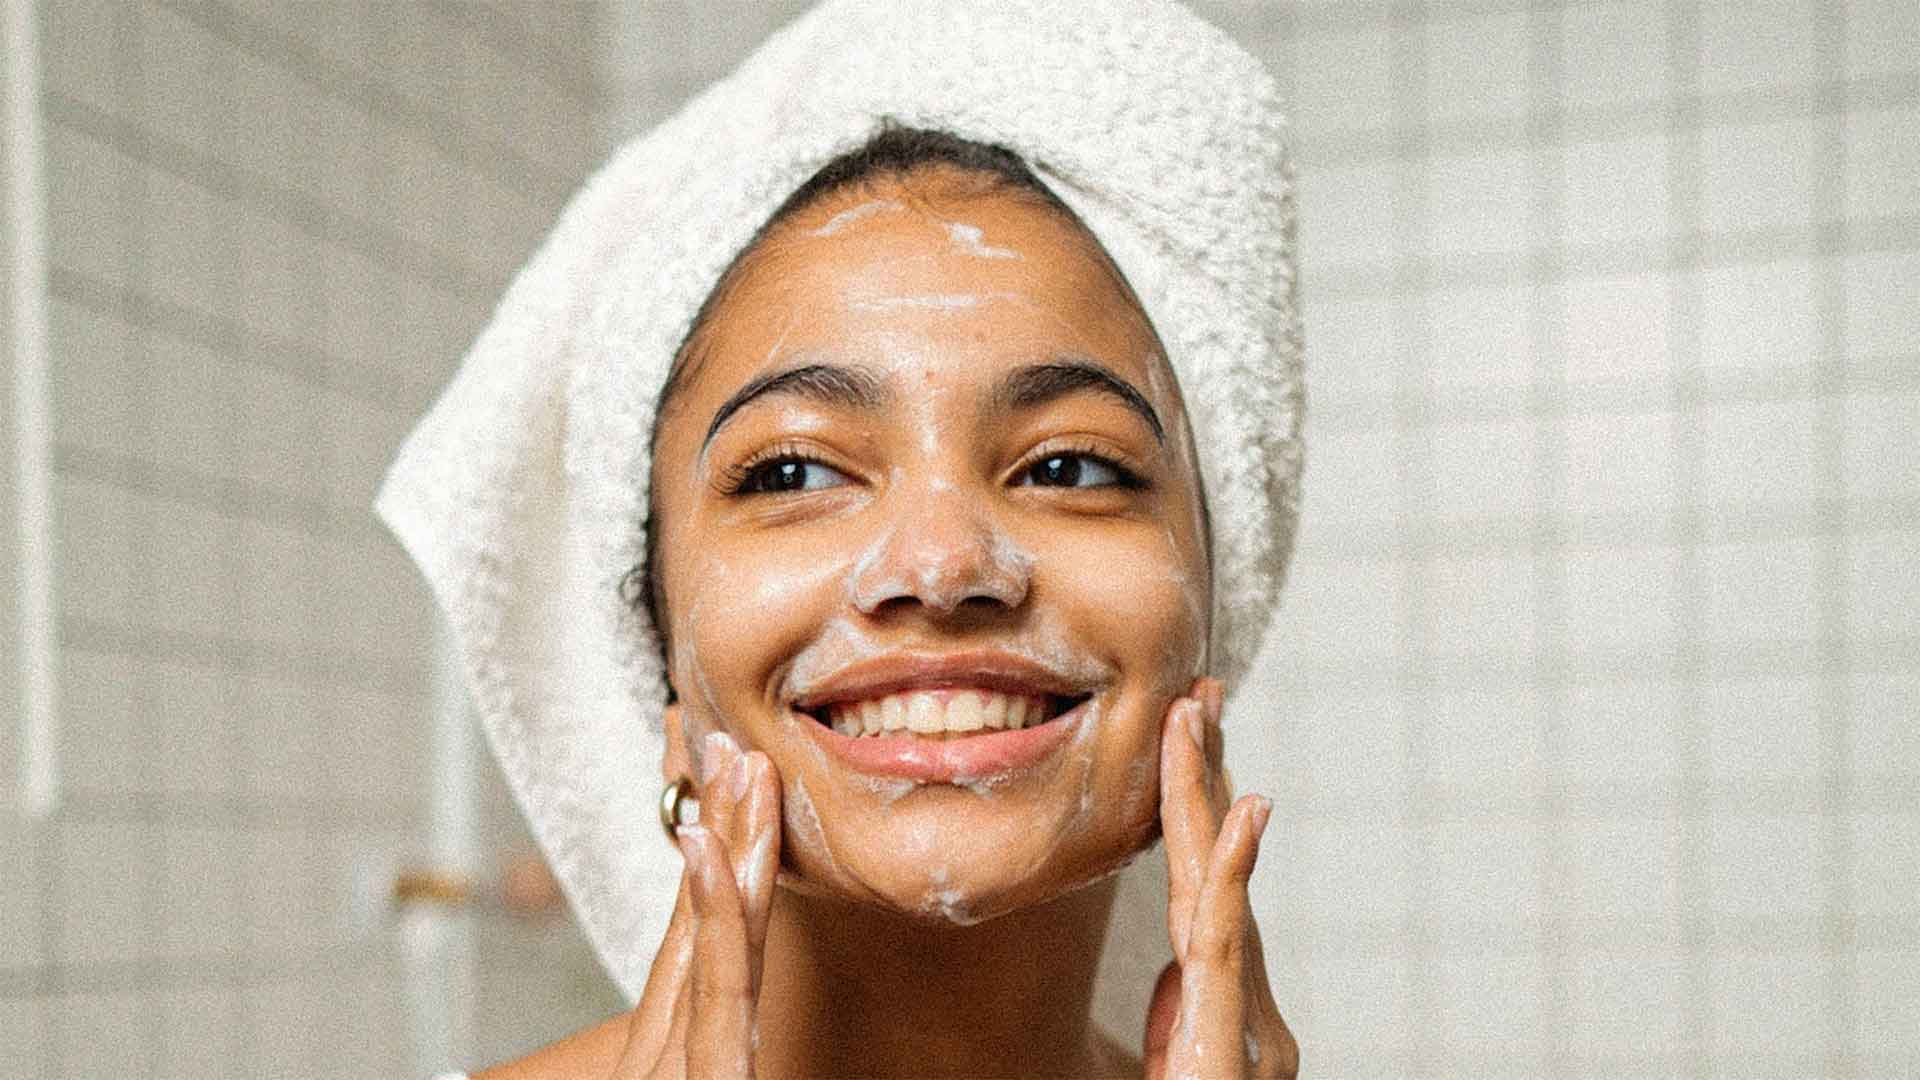 8 healthy habits for your skin